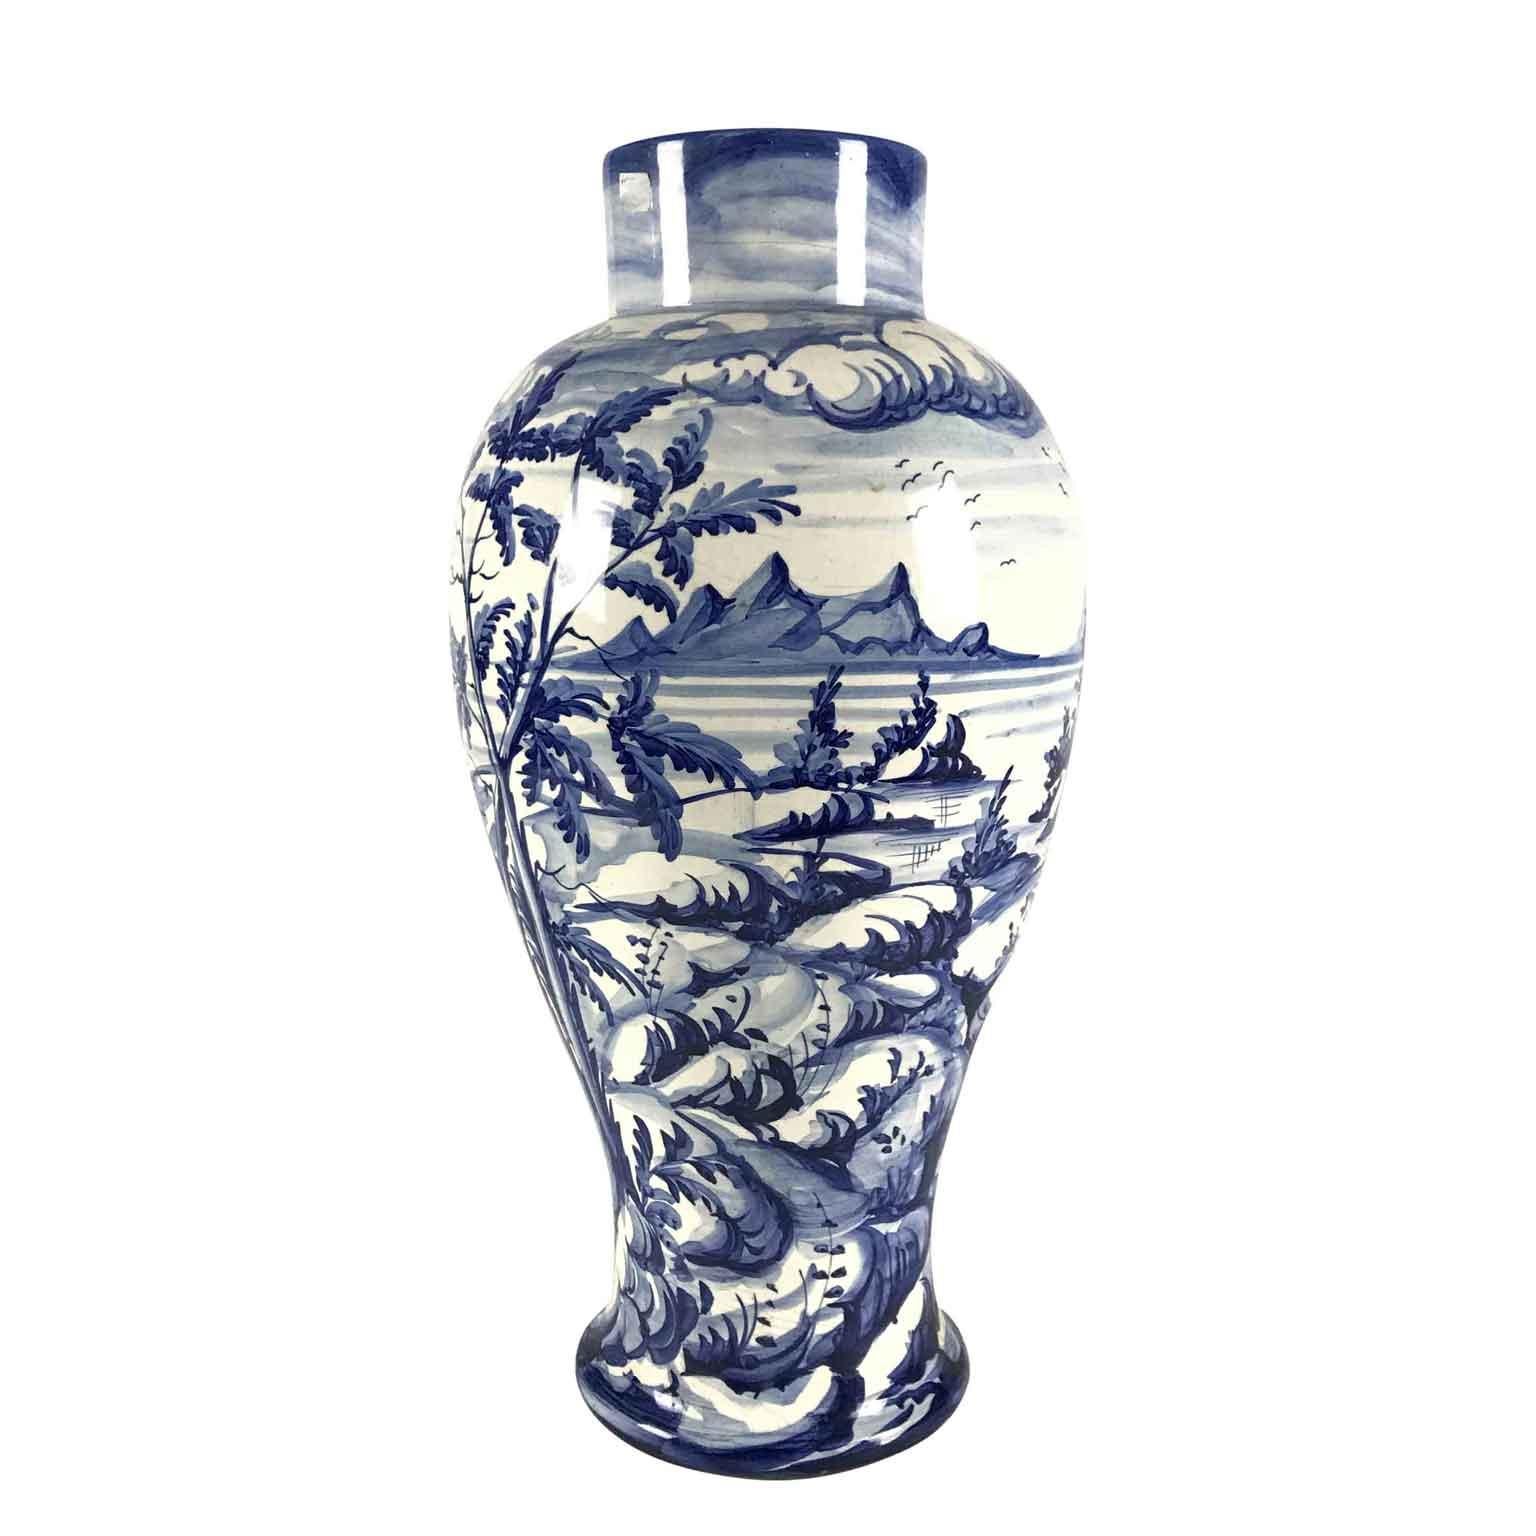 Hand-Crafted Florentine Vase in White and Blue Ceramic Landscape with Boats Taccini Vinci 1976 For Sale